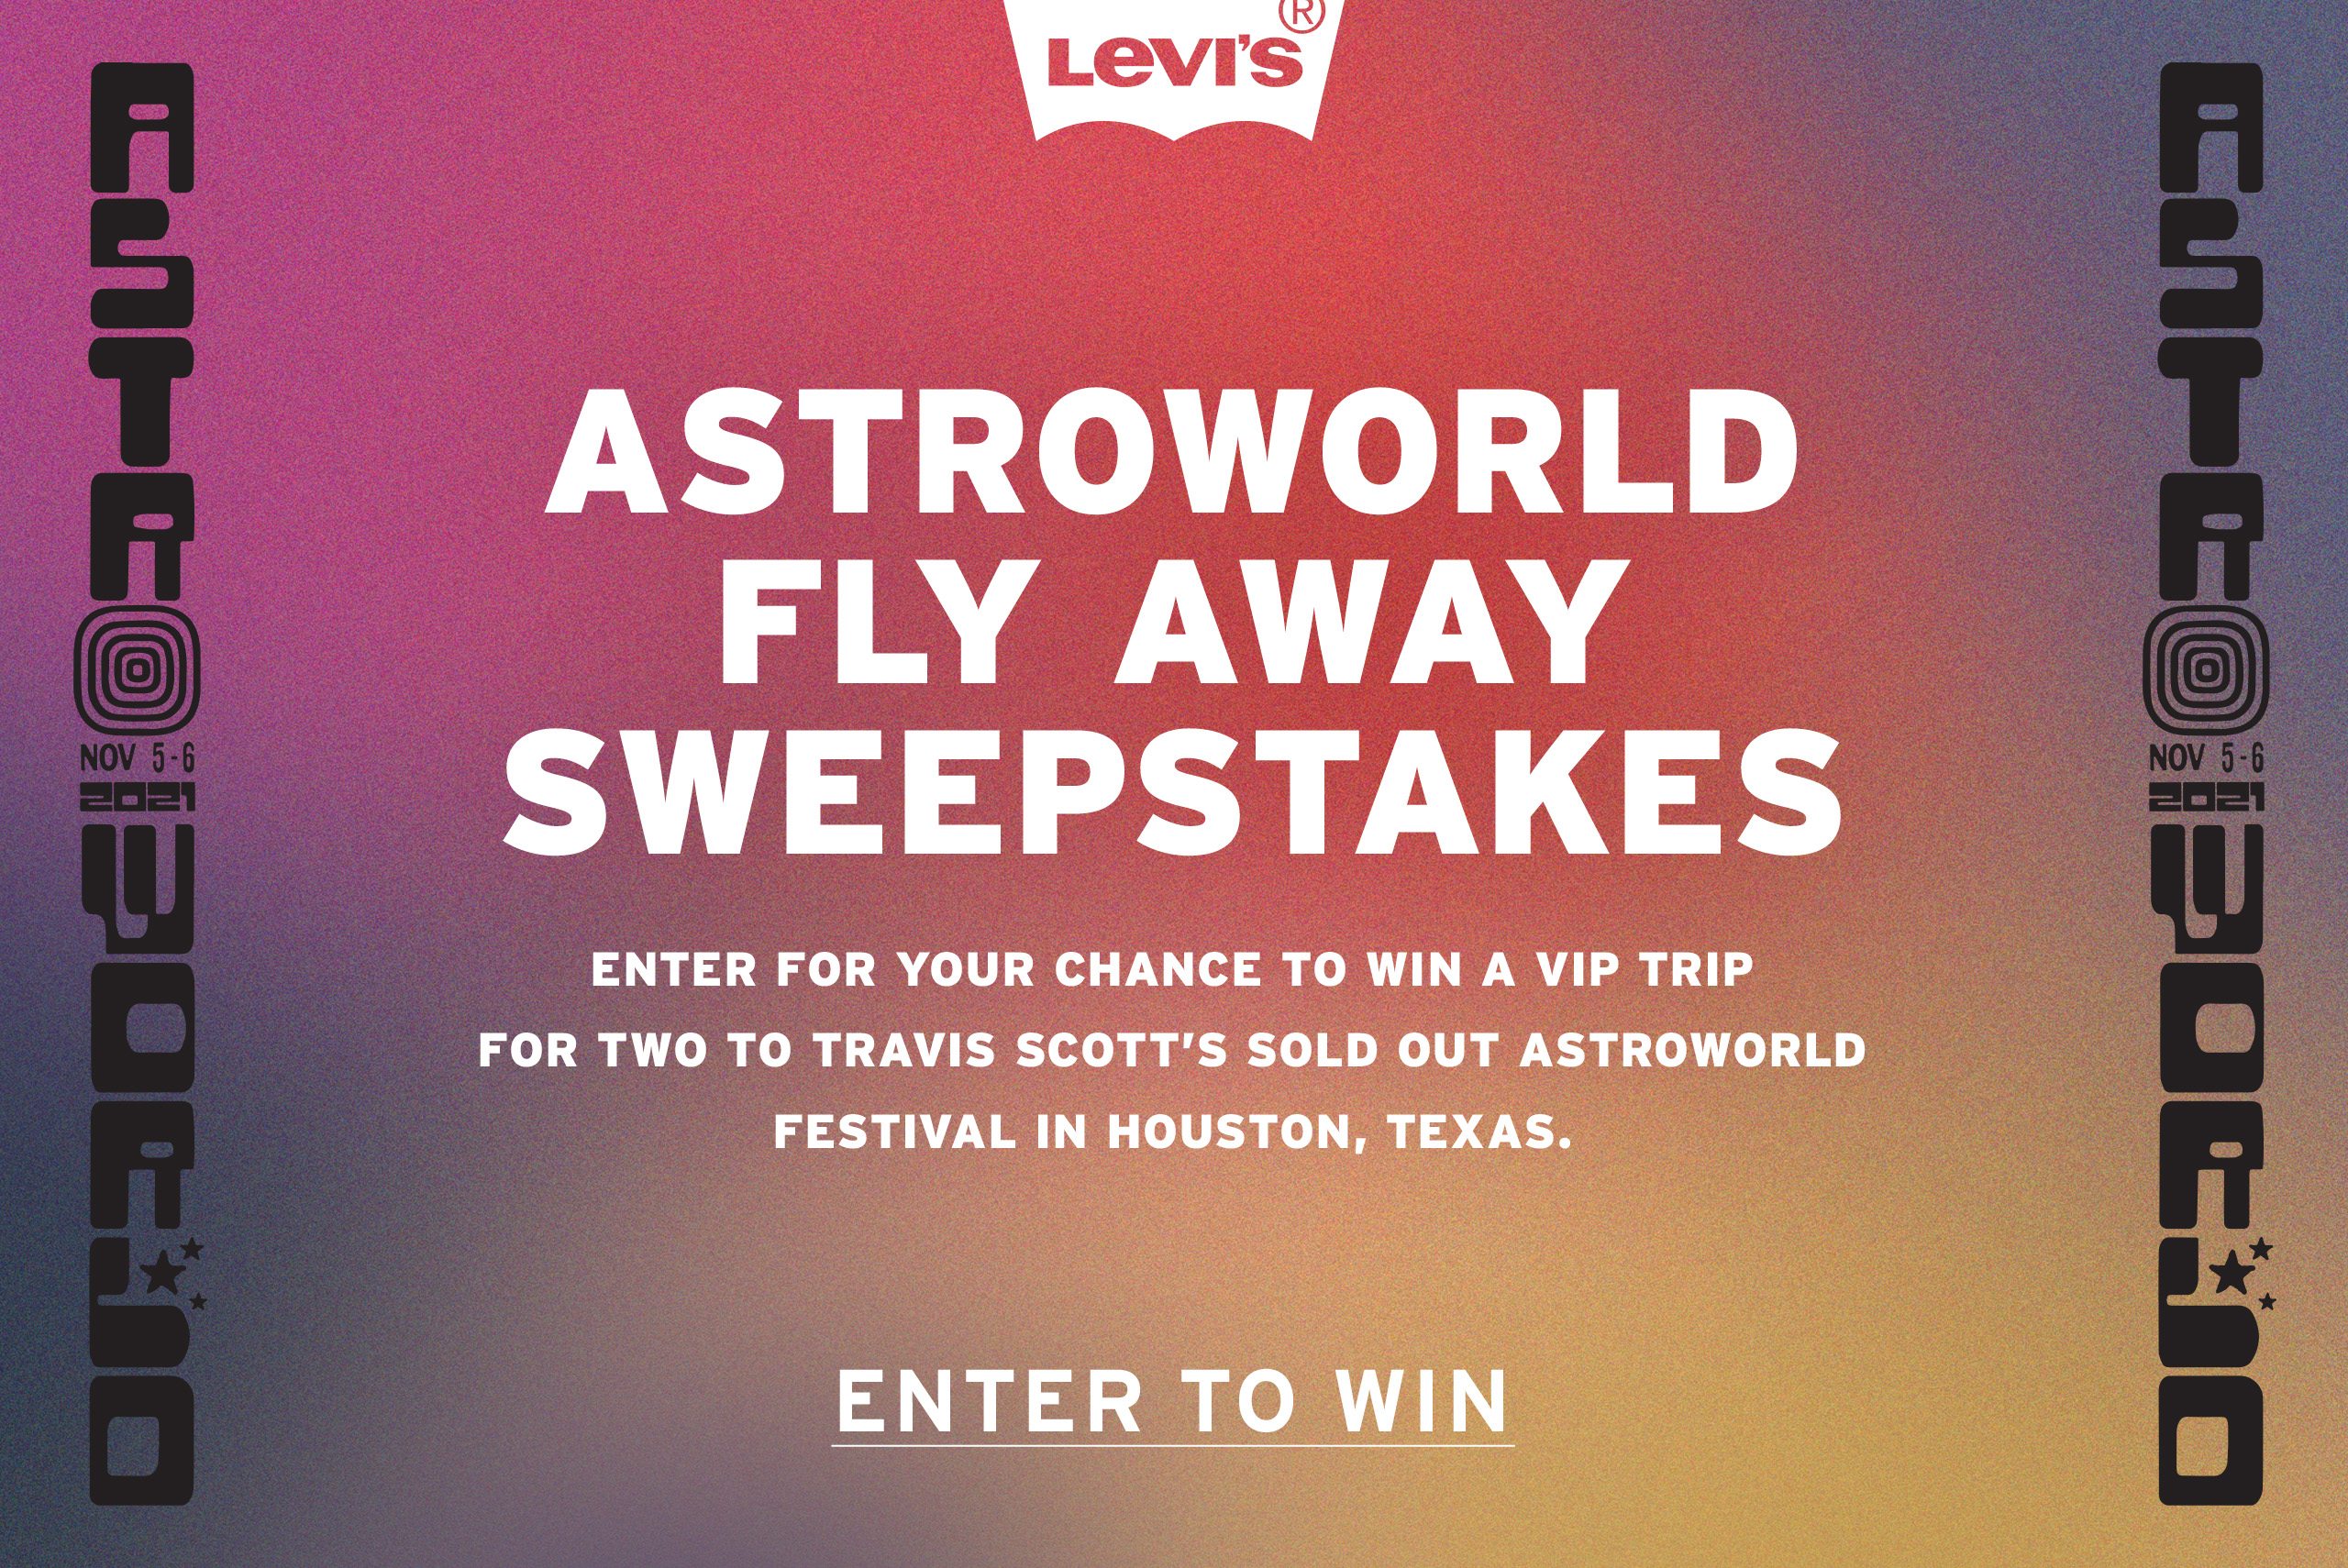 ASTROWORLD FLY AWAY SWEEPS